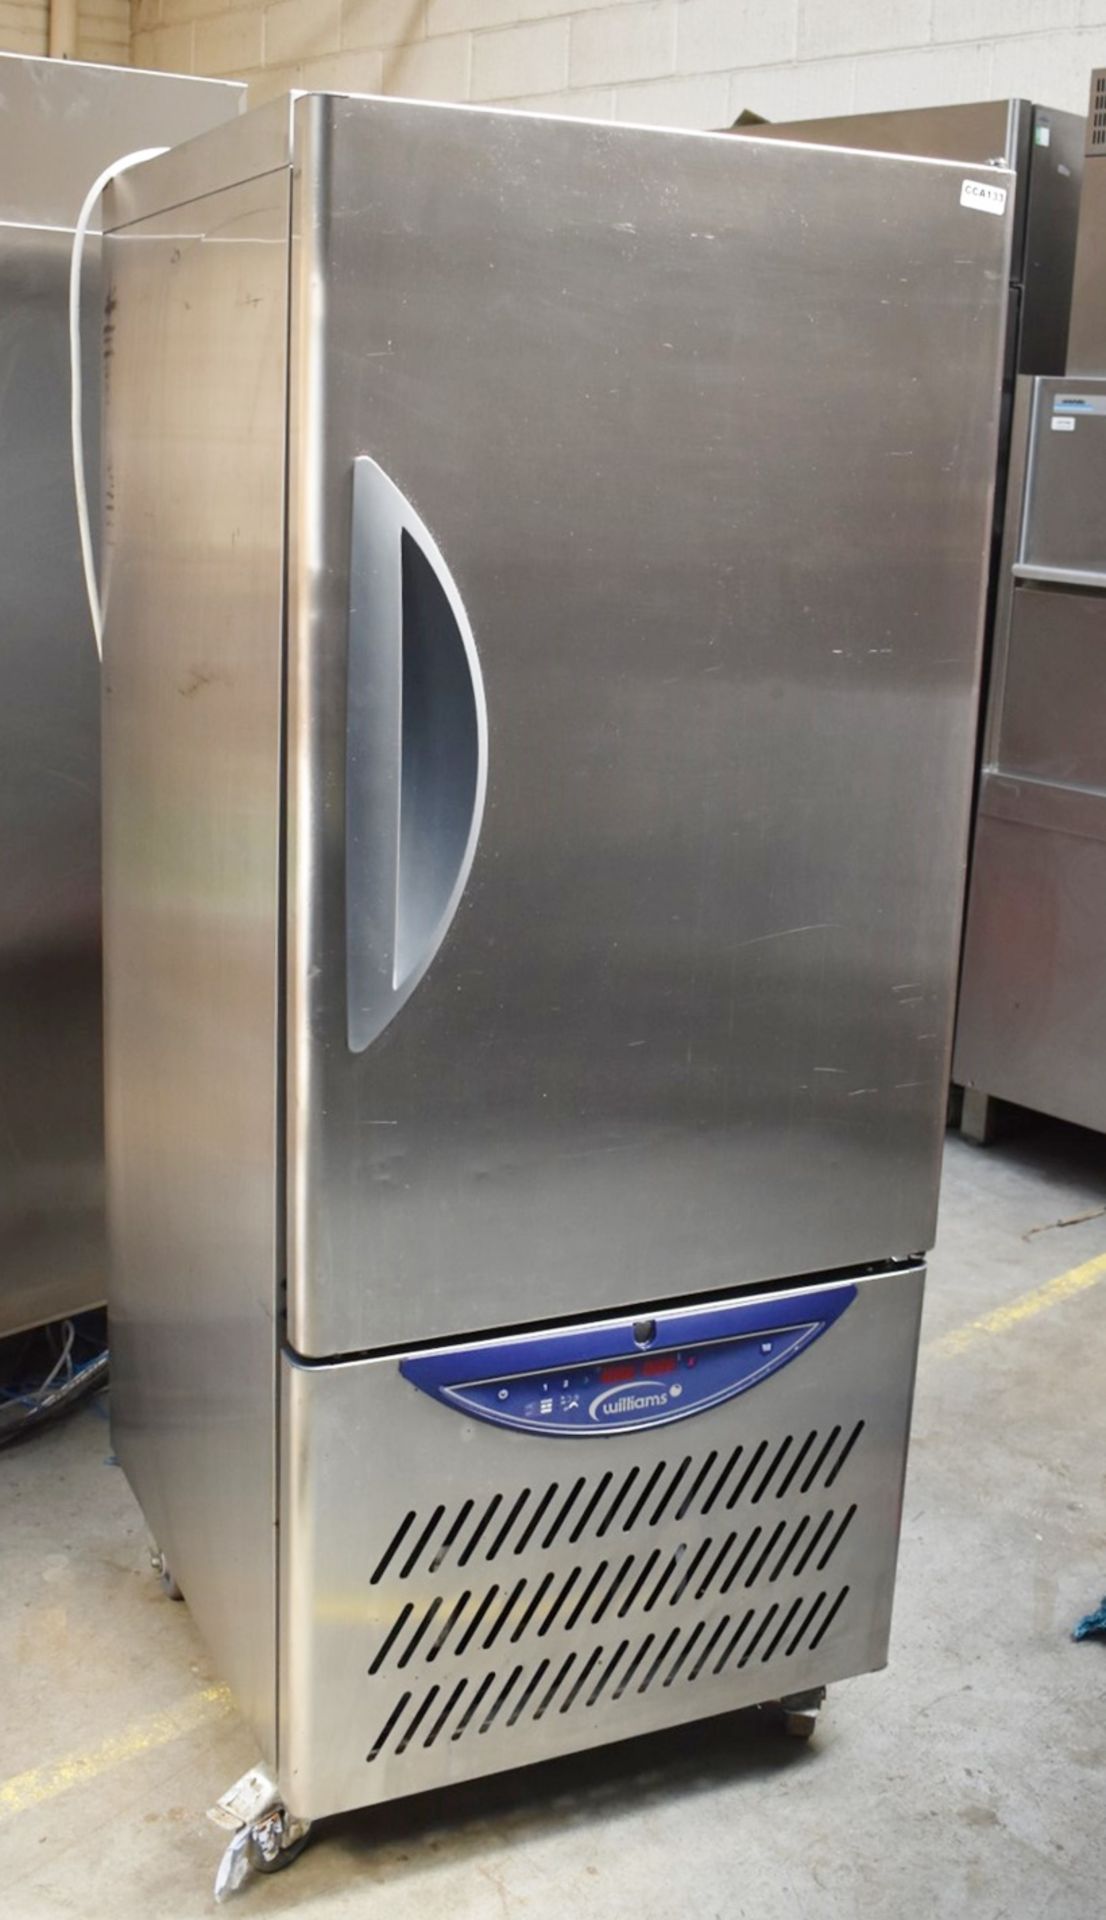 1 x Williams WBCF40 Reach In Blast Chiller Freezer With Stainless Steel Exterior and 40kg Capacity